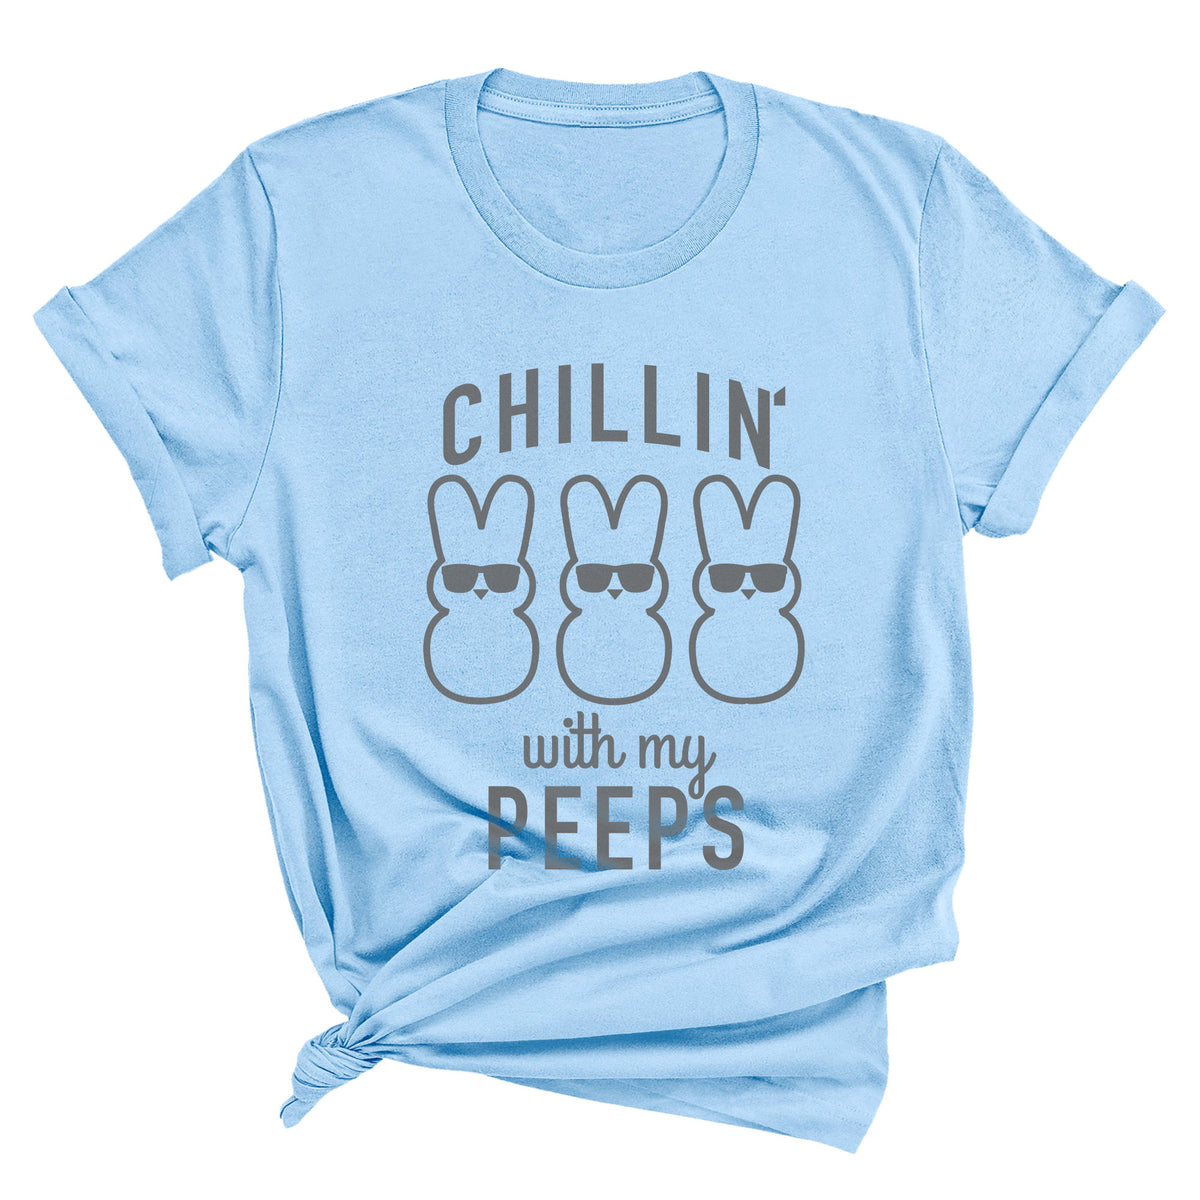 Chillin’ with My Peeps Unisex T-Shirt